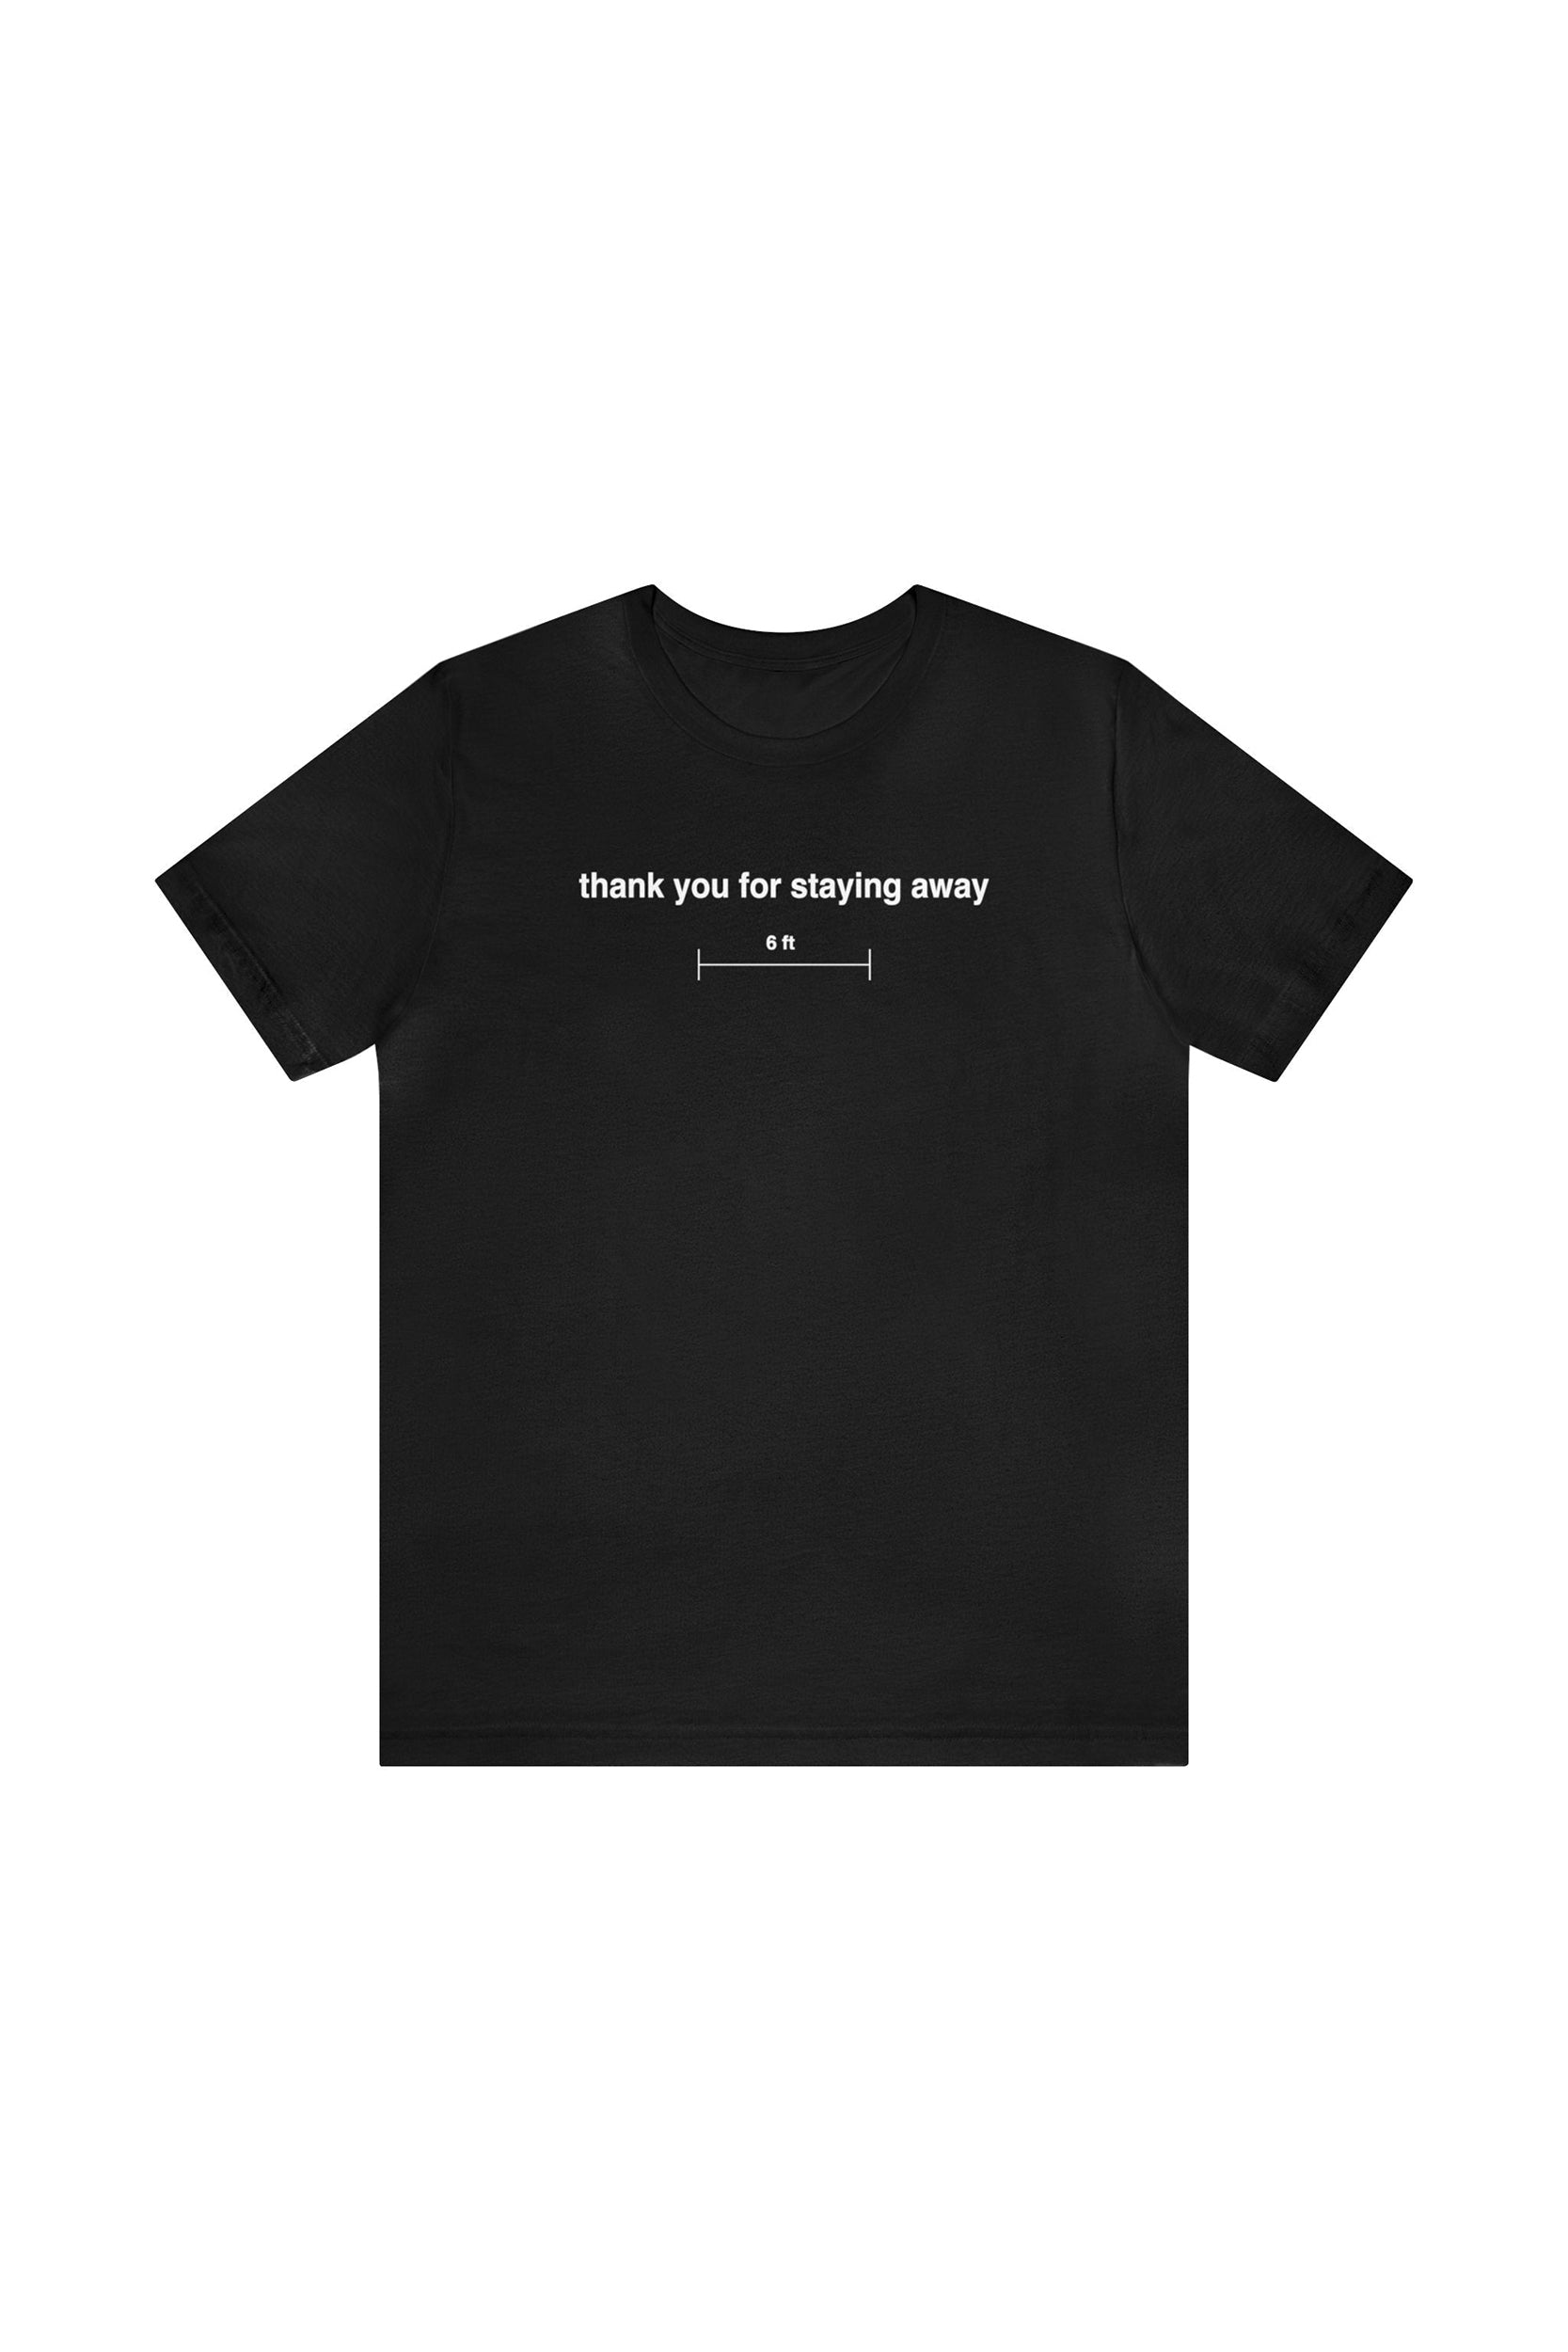 Image of "Thank you for staying away"  T-Shirt